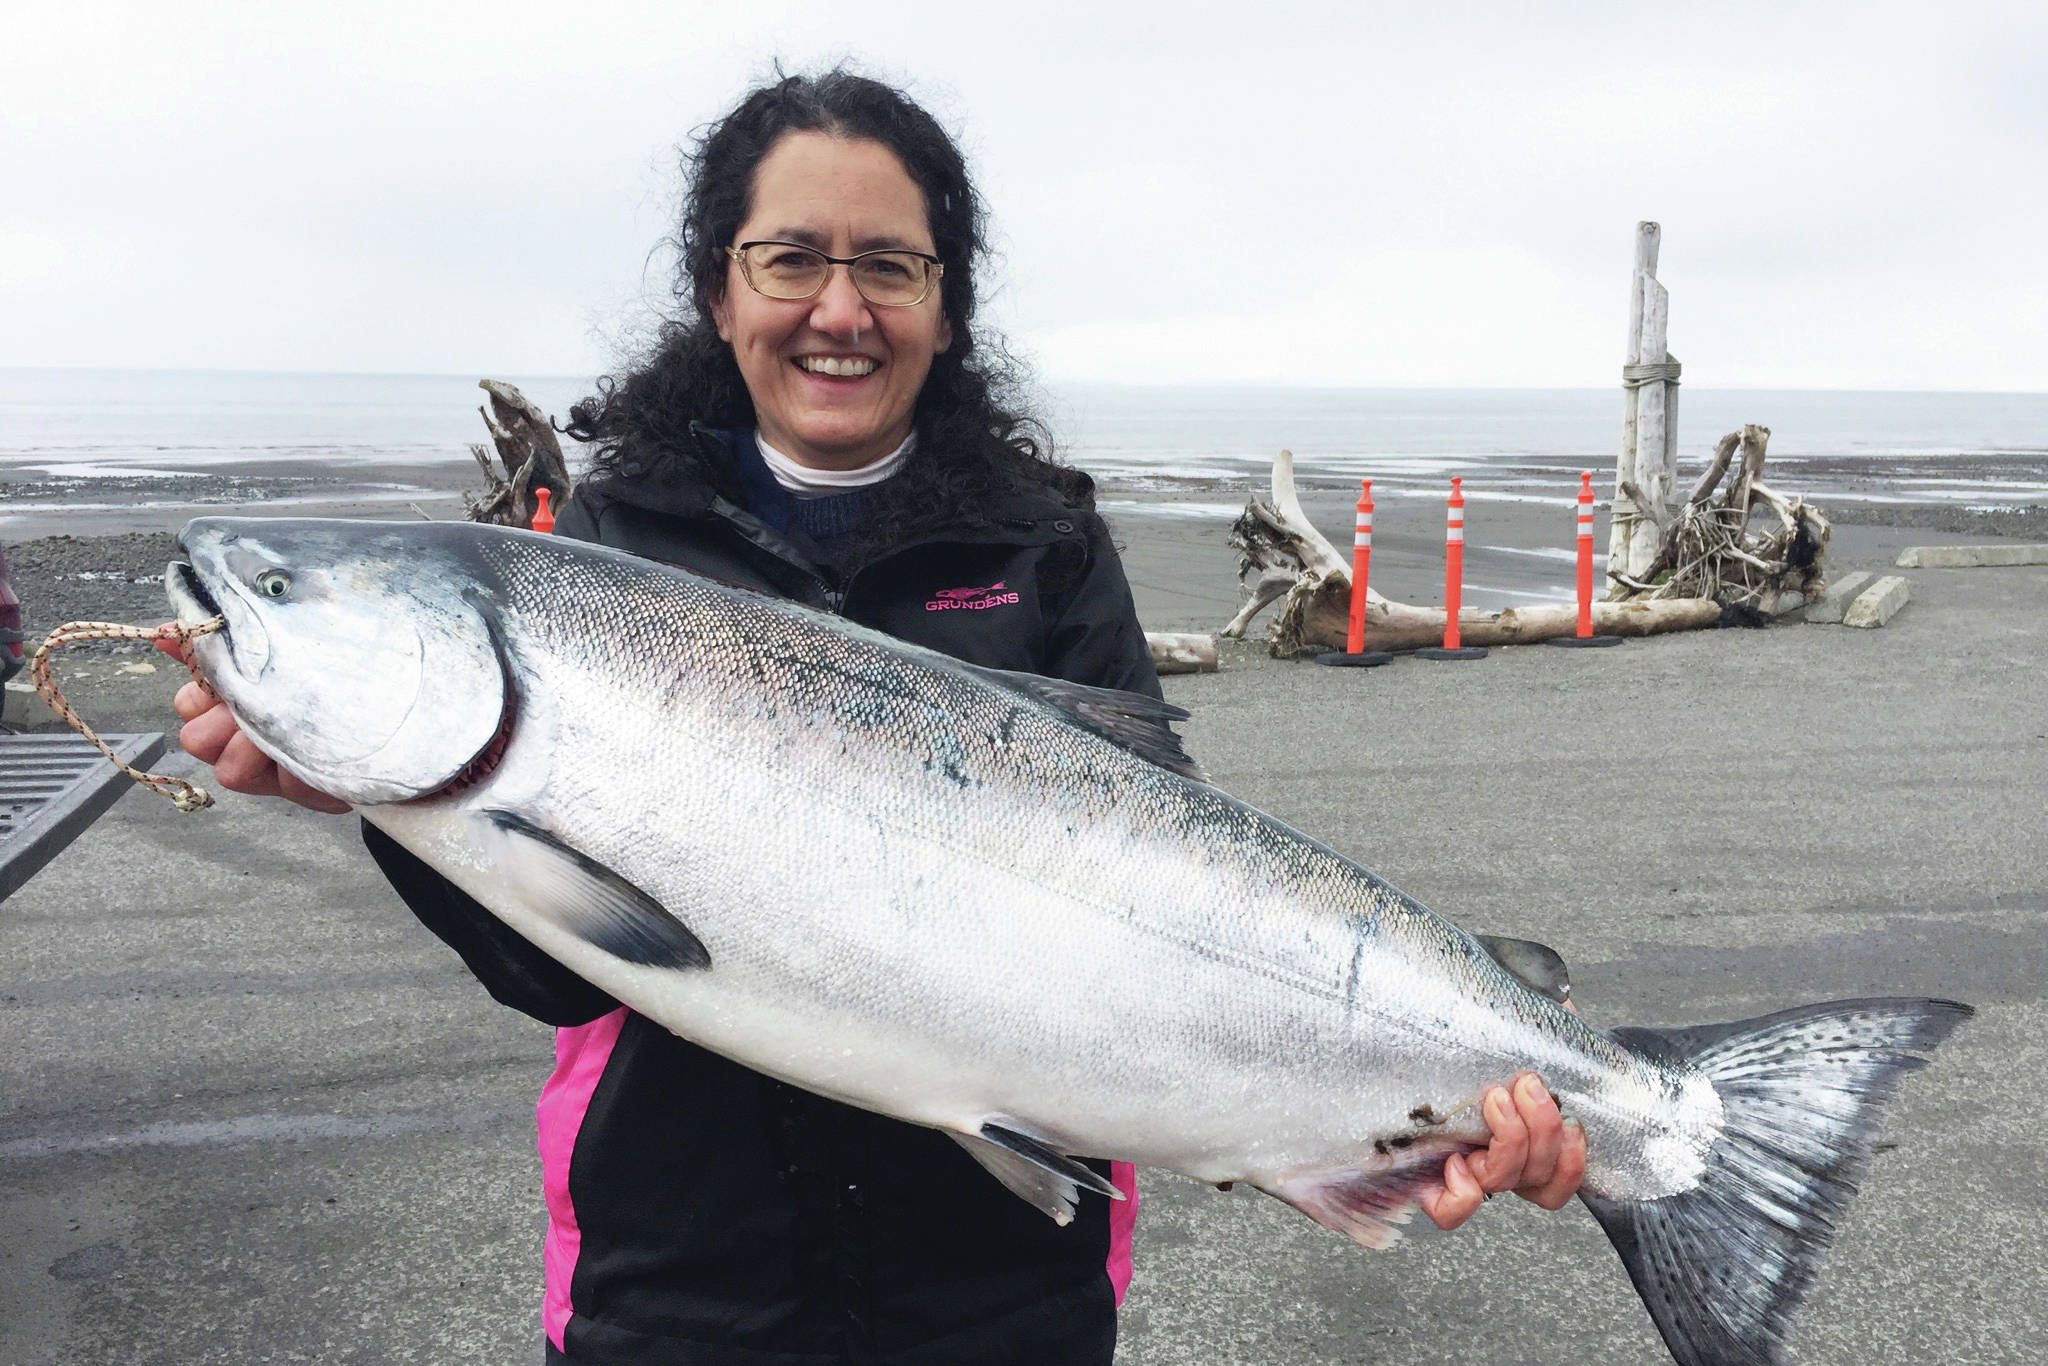 Derotha Ferraro from the fishing vessel Big Game poses with the king salmon she caught at the Anchor Point King Salmon Calcutta on Sunday, May 12, 2019, in Anchor Point, Alaska. Ferraro’s fish was one of the top ten fish caught in the tournament, weighing more than 20 pounds. (Photo courtesy of Bill Scott)